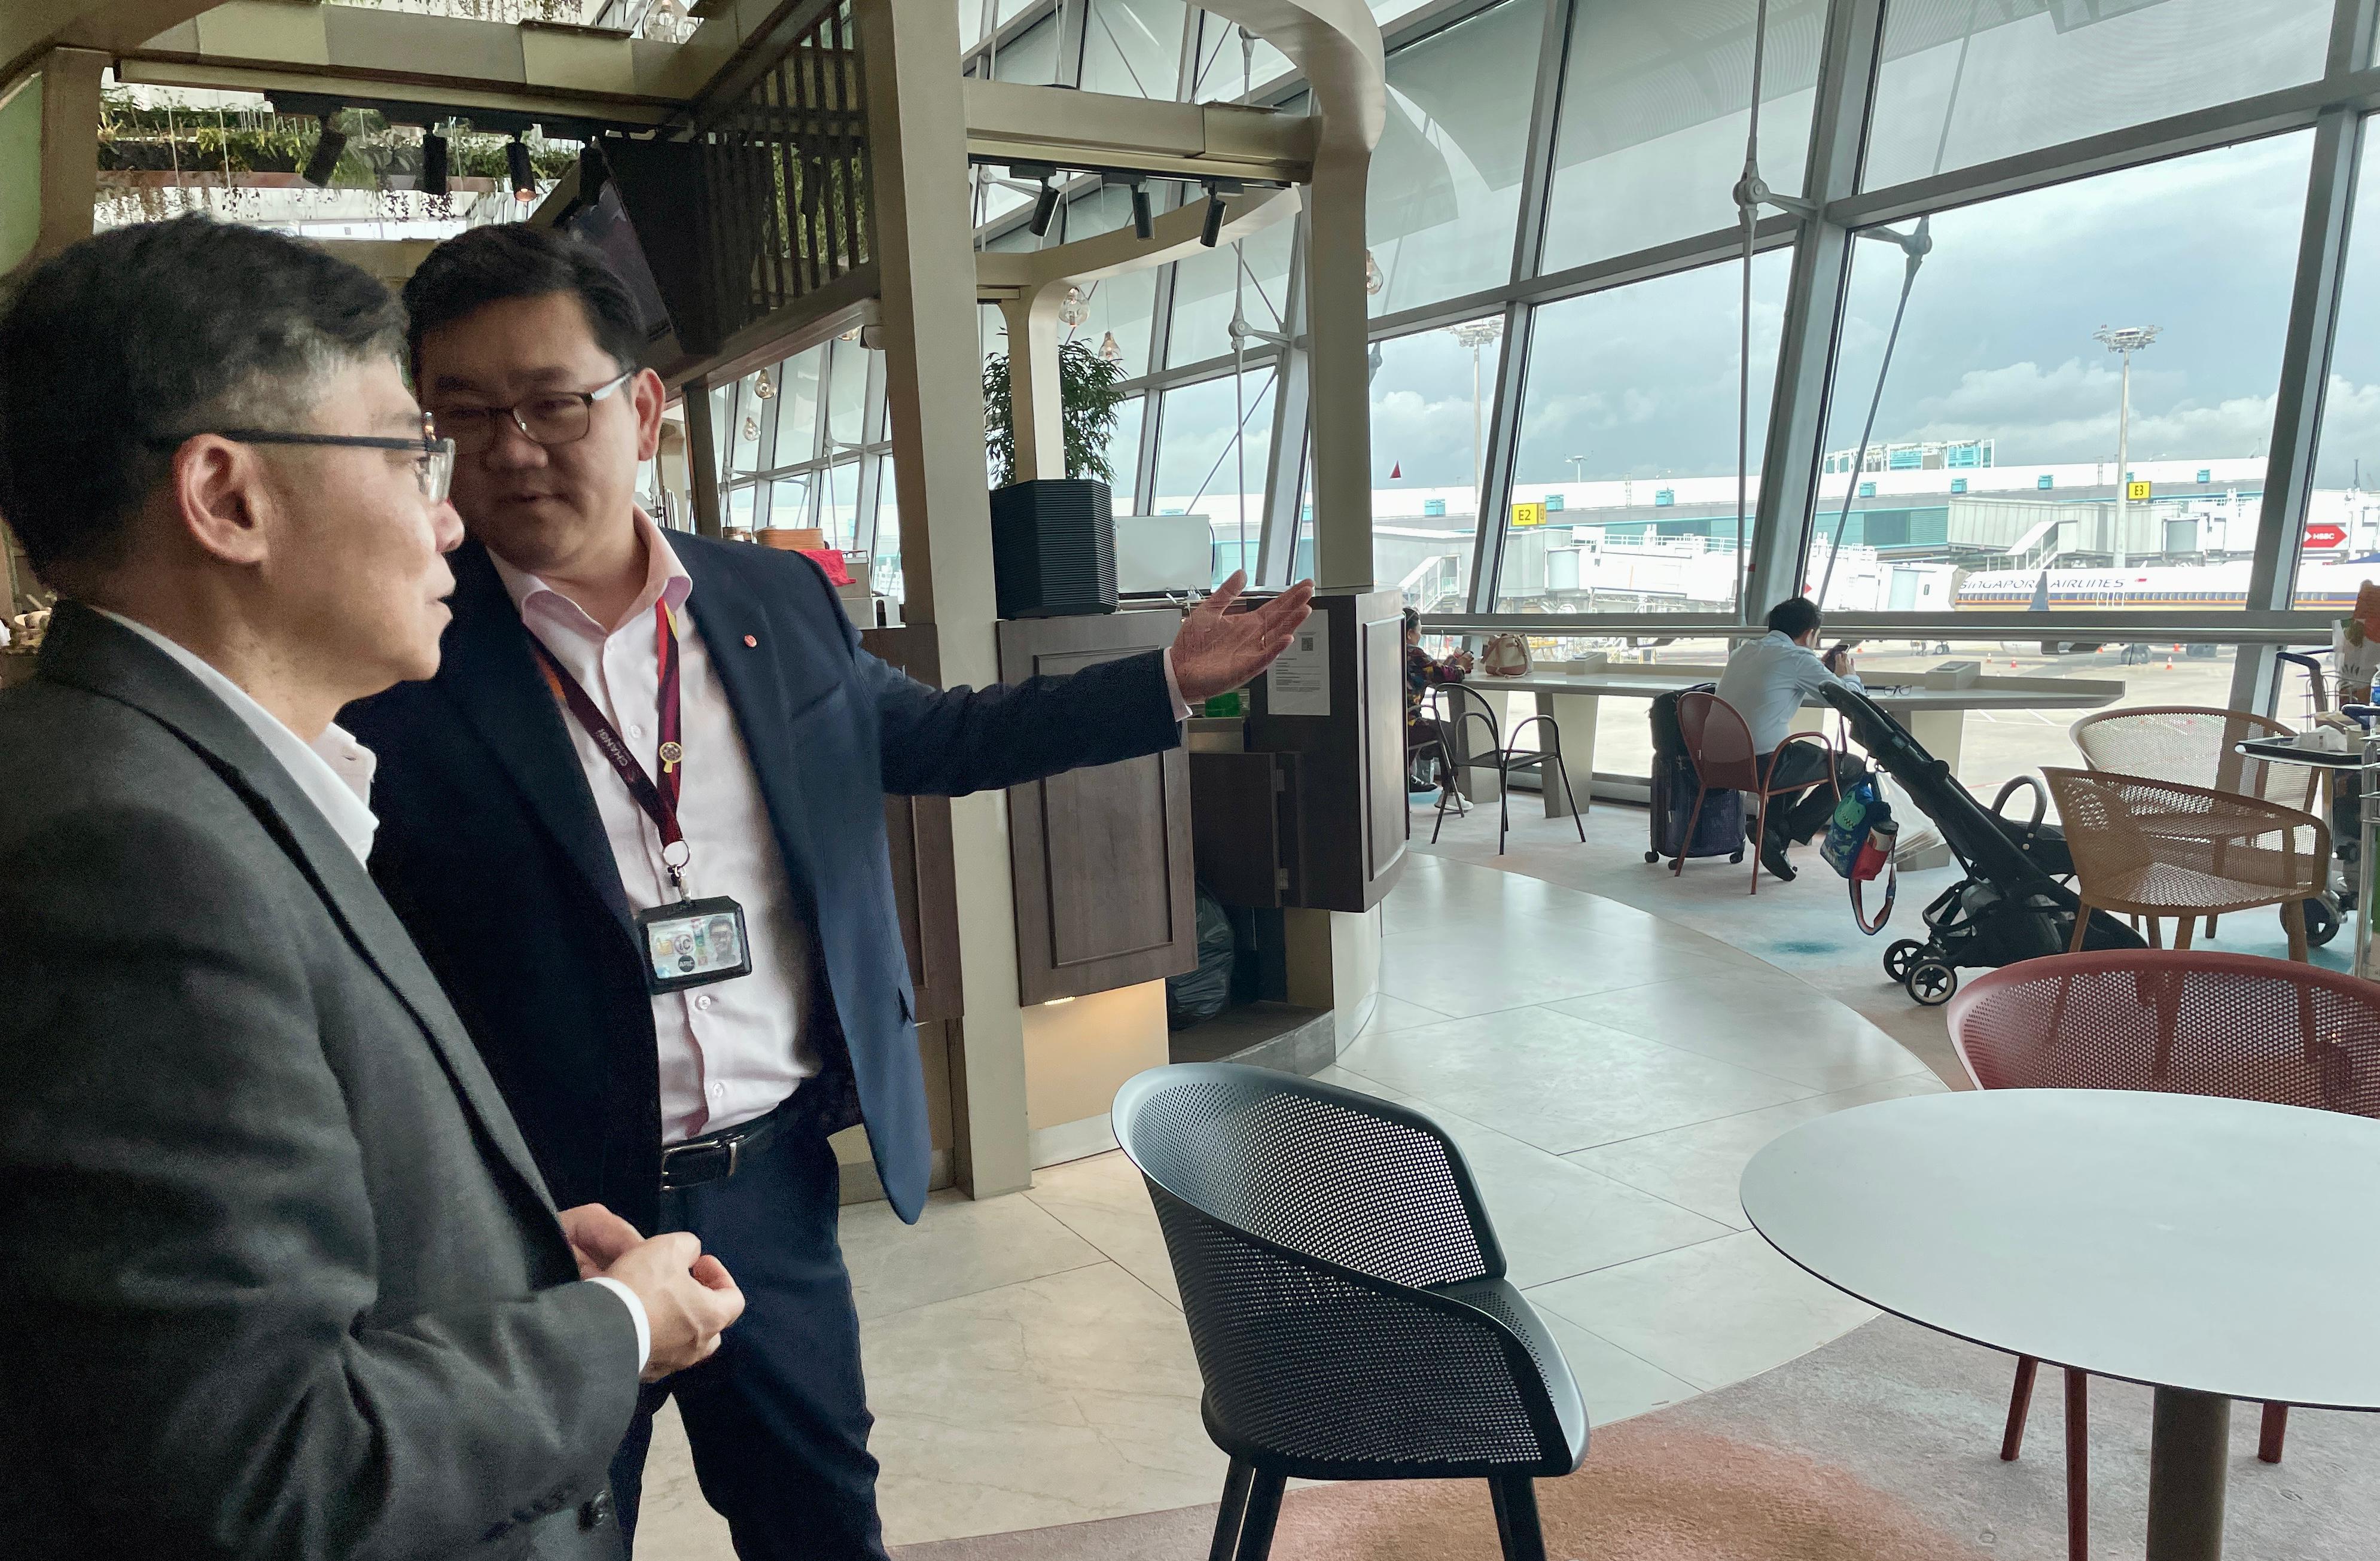 The Secretary for Transport and Logistics, Mr Lam Sai-hung, continued his visit to Singapore today (January 31).  Photo shows Mr Lam (left) receiving a briefing on Changi Airport.